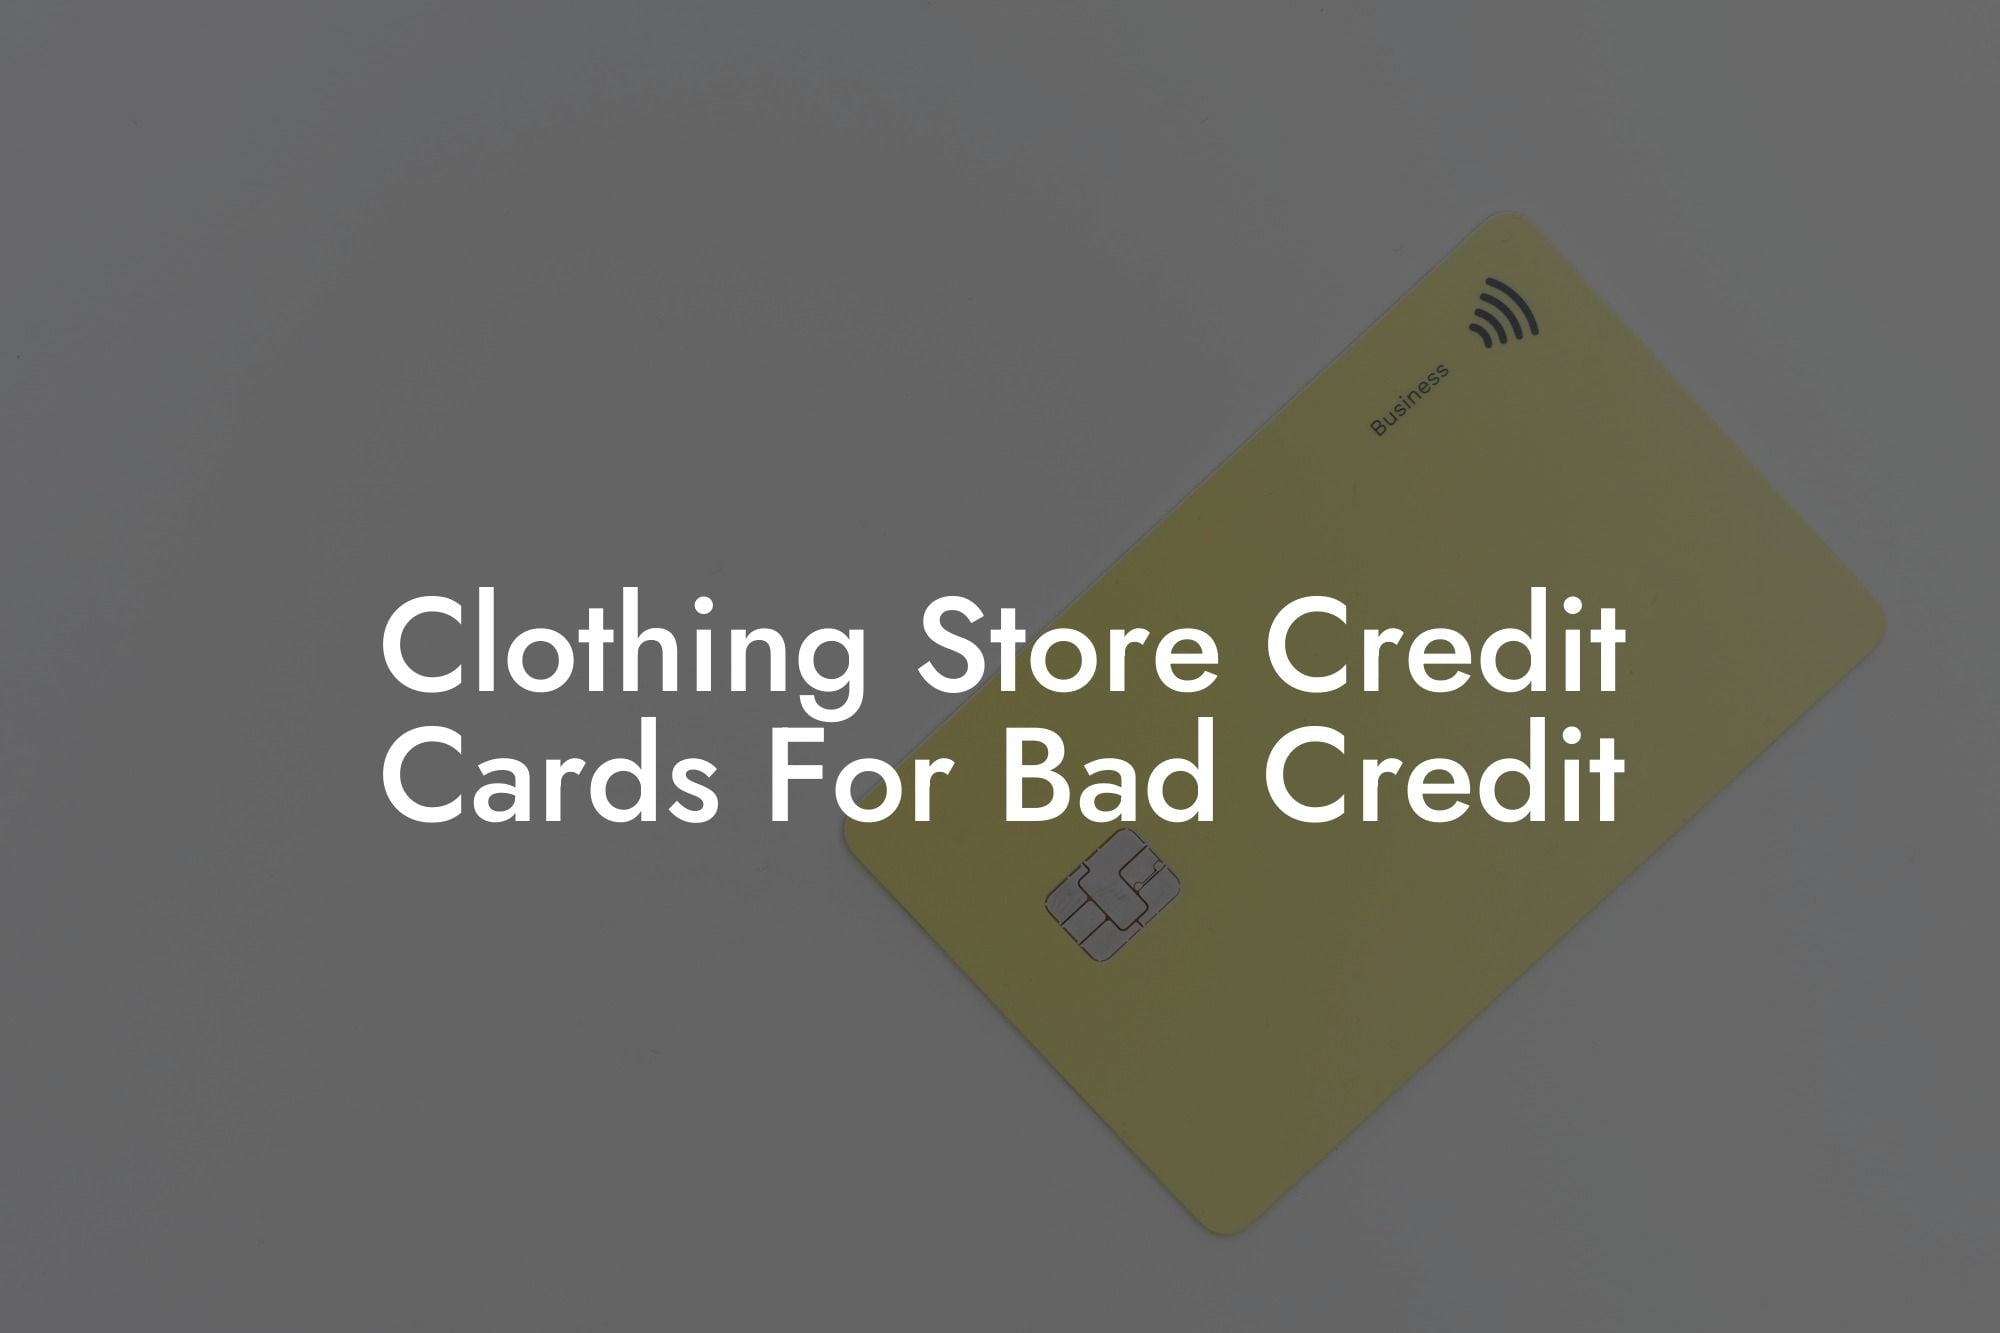 Clothing Store Credit Cards For Bad Credit